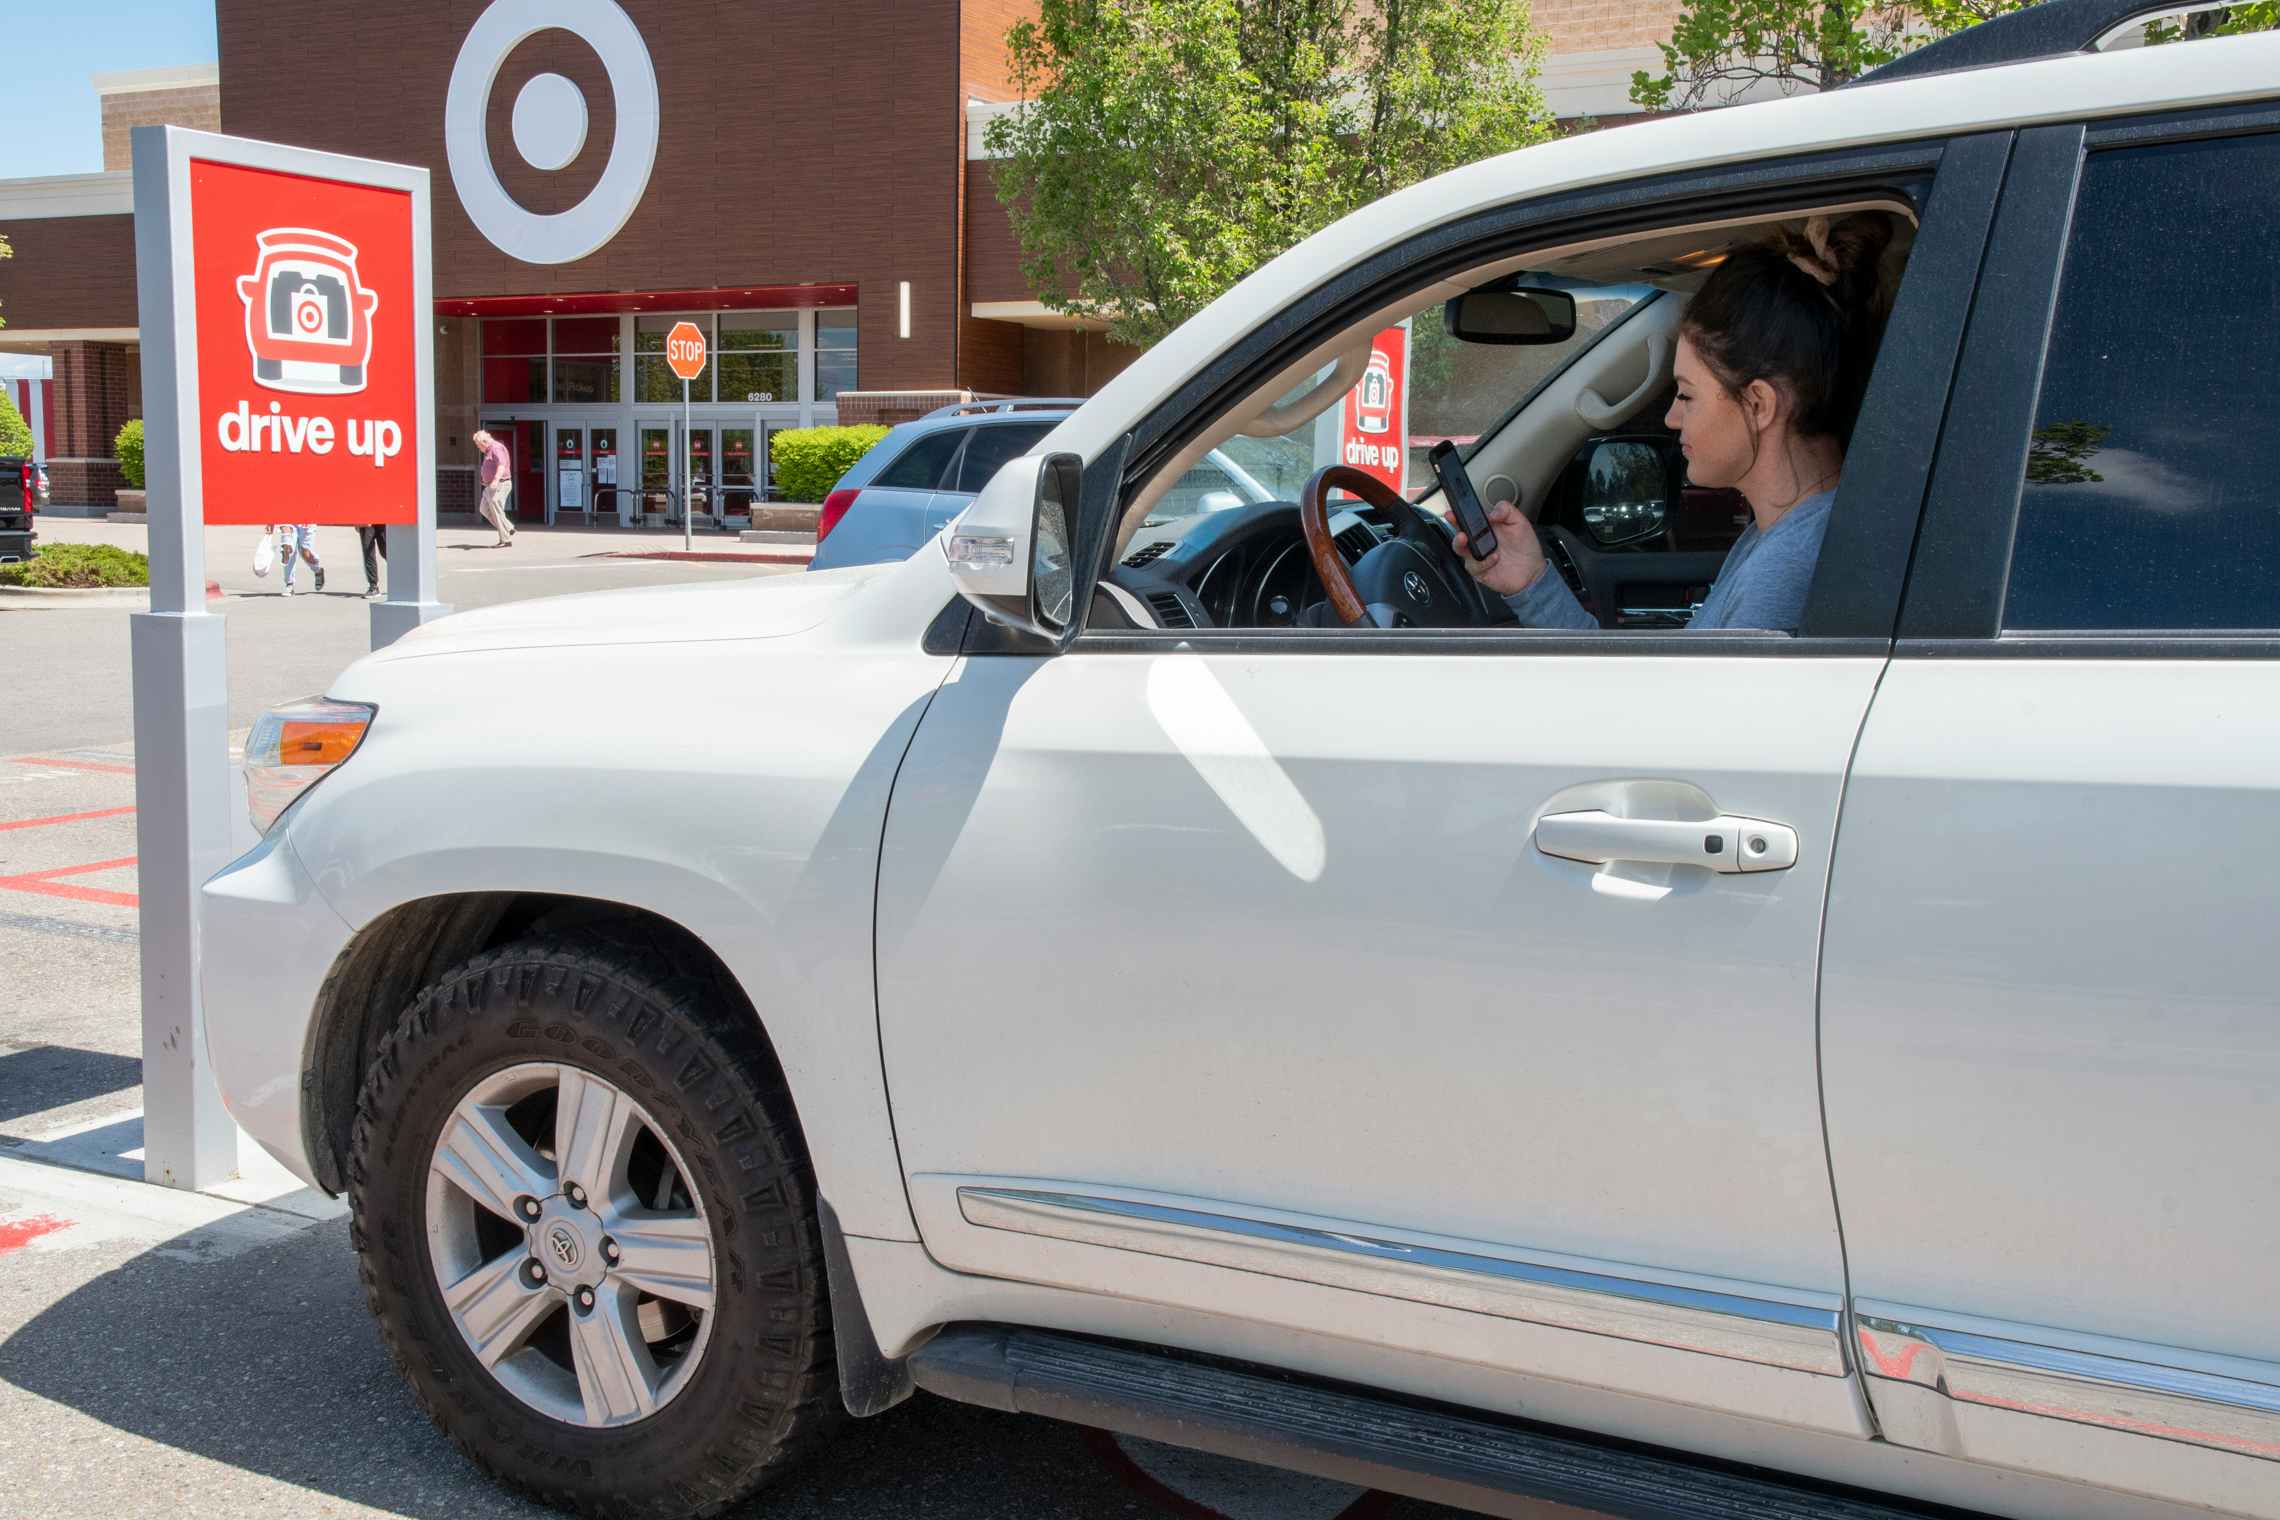 A person sitting in a car that is parked in the Target parking spot for Drive Up orders, looking down at a phone.